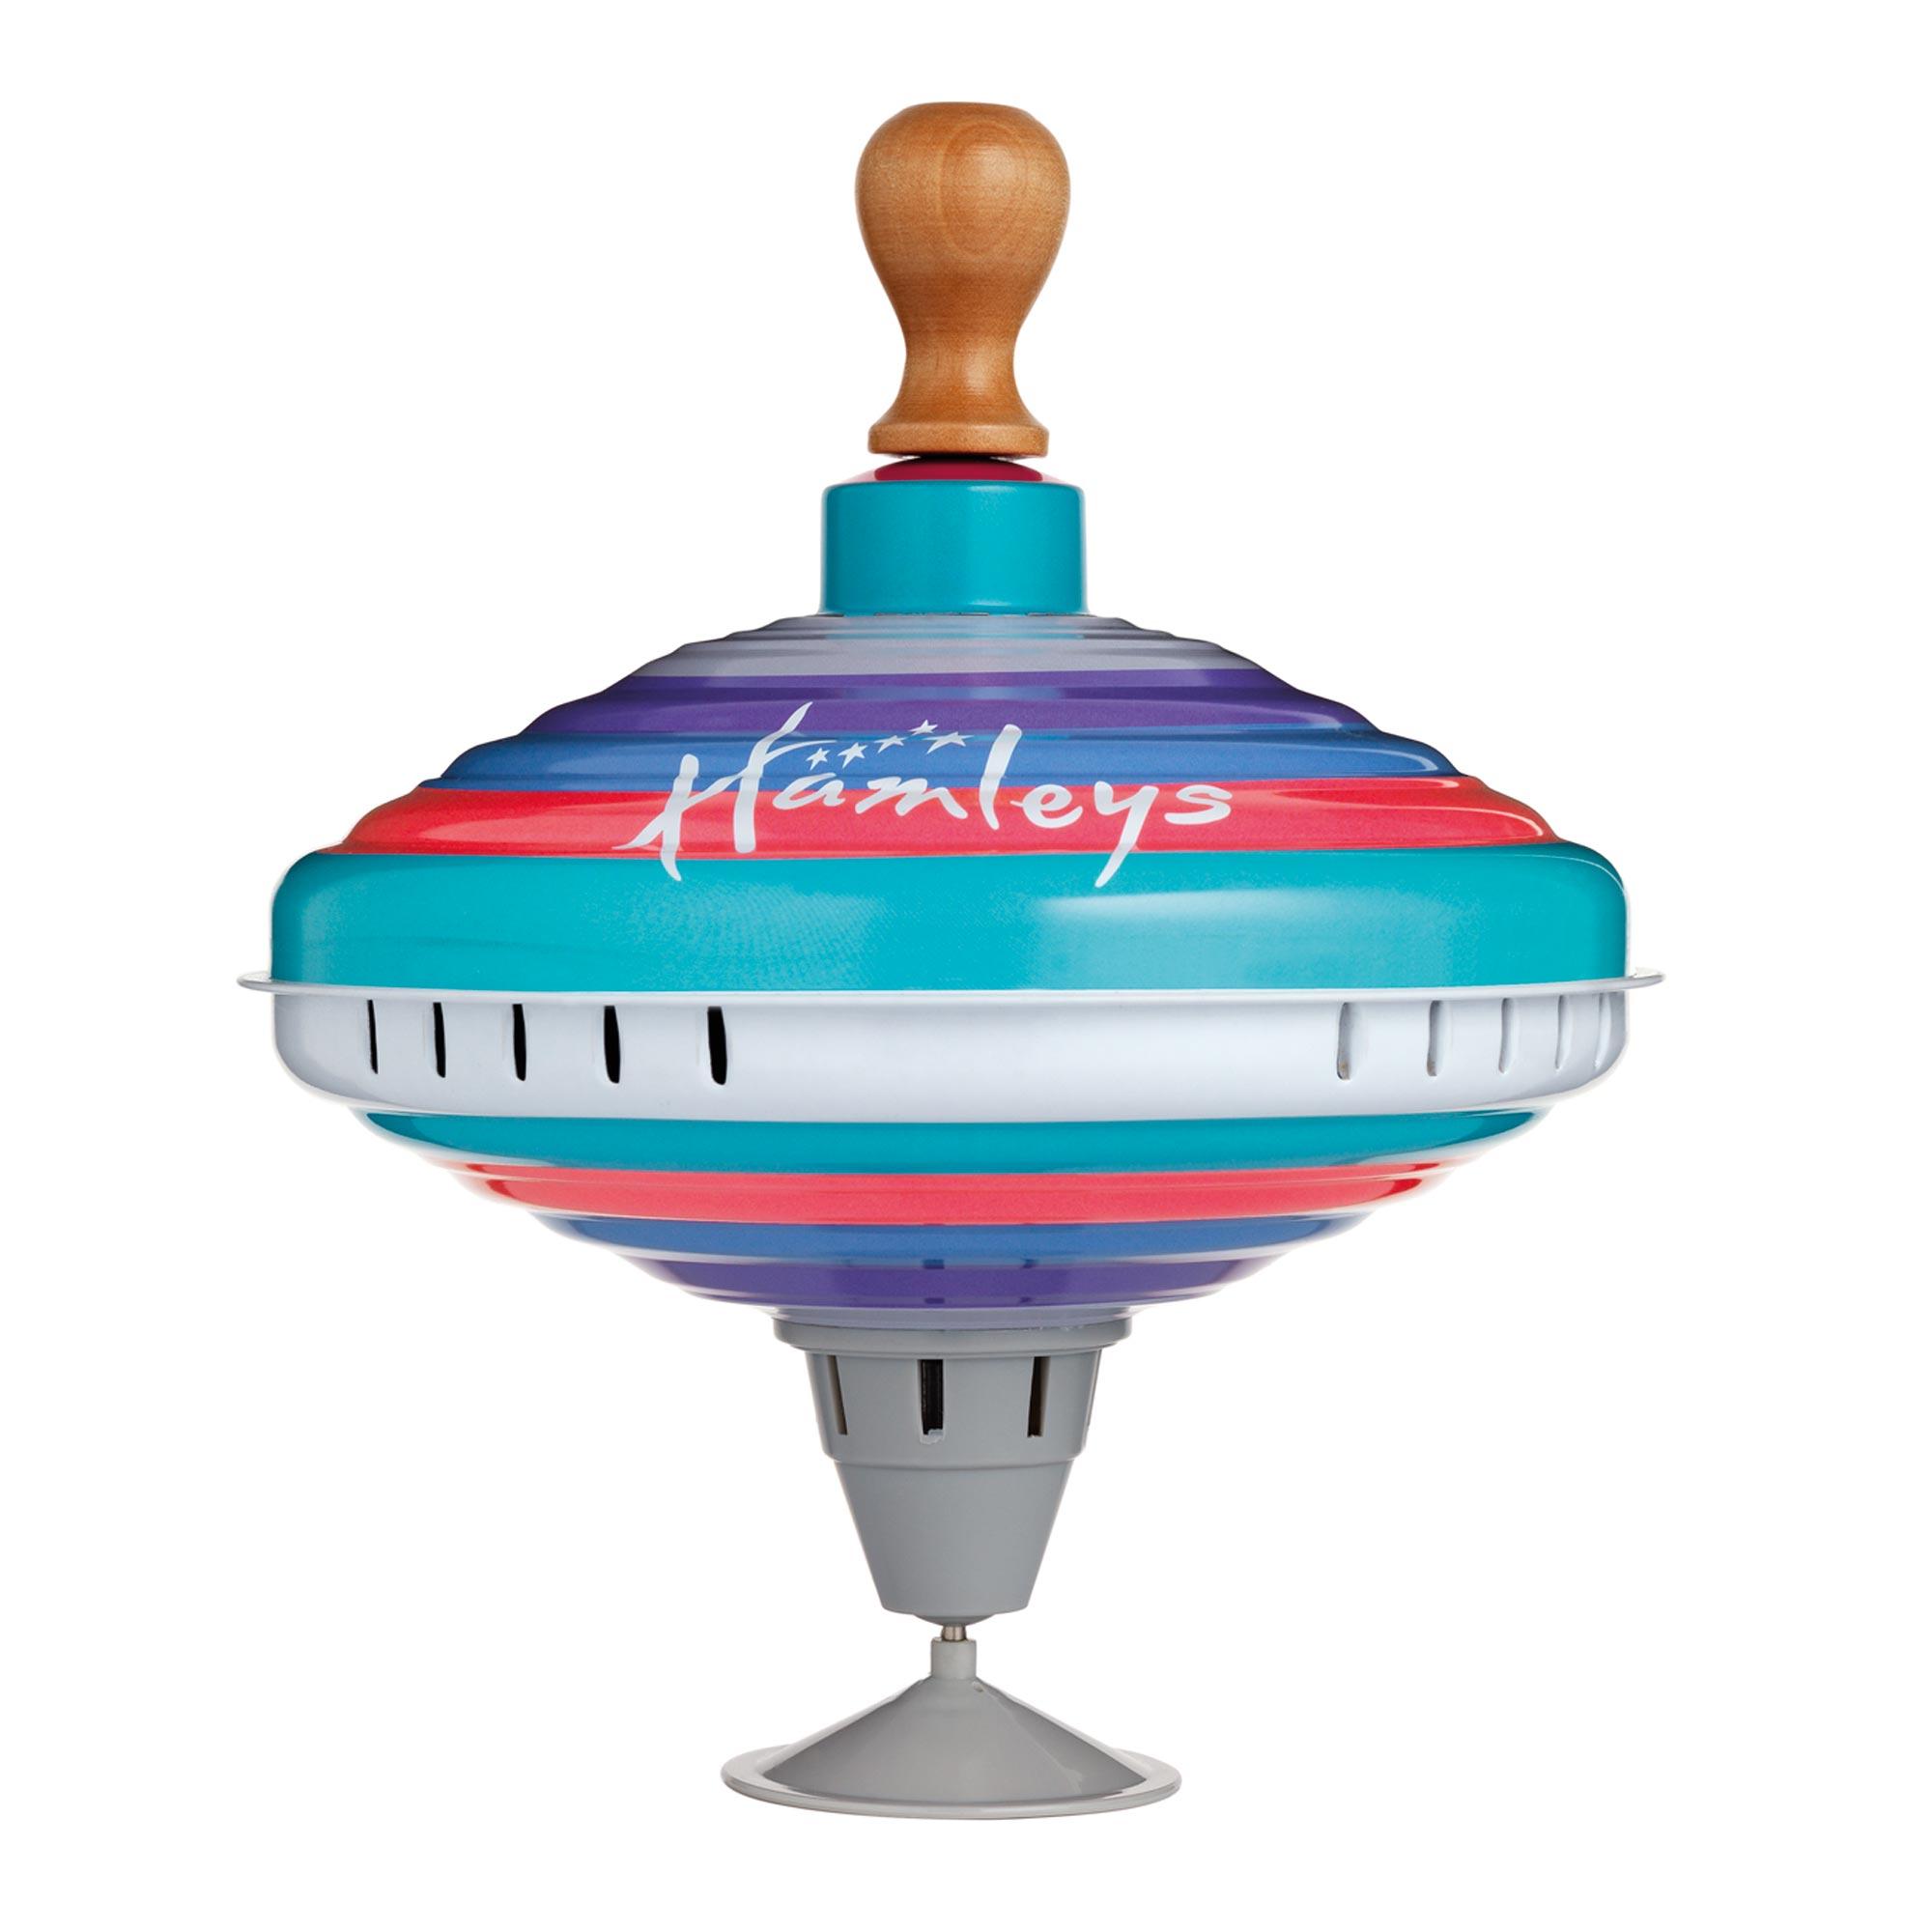 Hamleys Spinning Top - £17.00 - Hamleys for Toys and Games